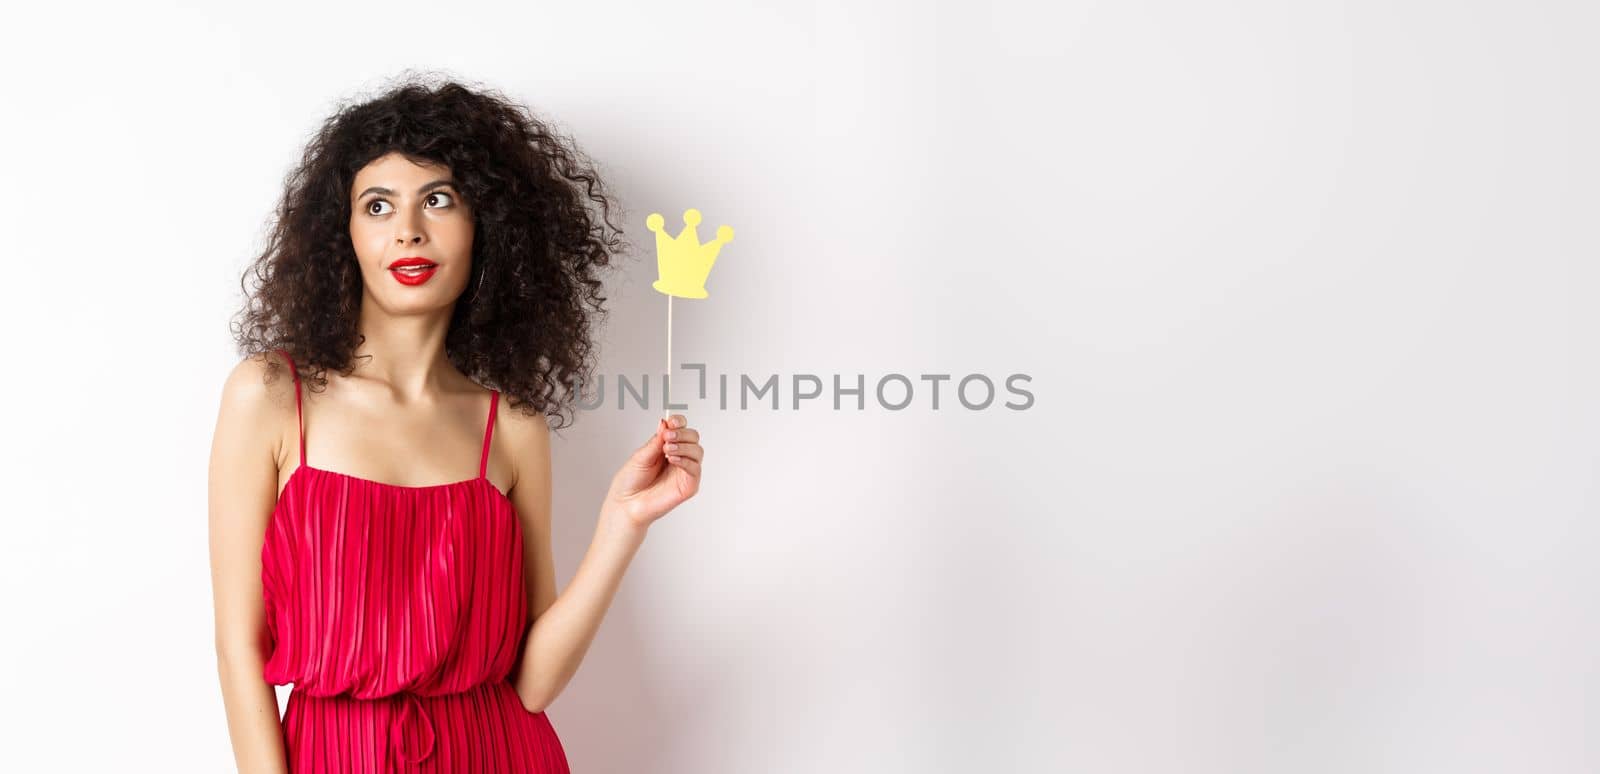 Stylish woman with curly hair in red dress, holding queen crown on stick and looking aside, standing on white background.